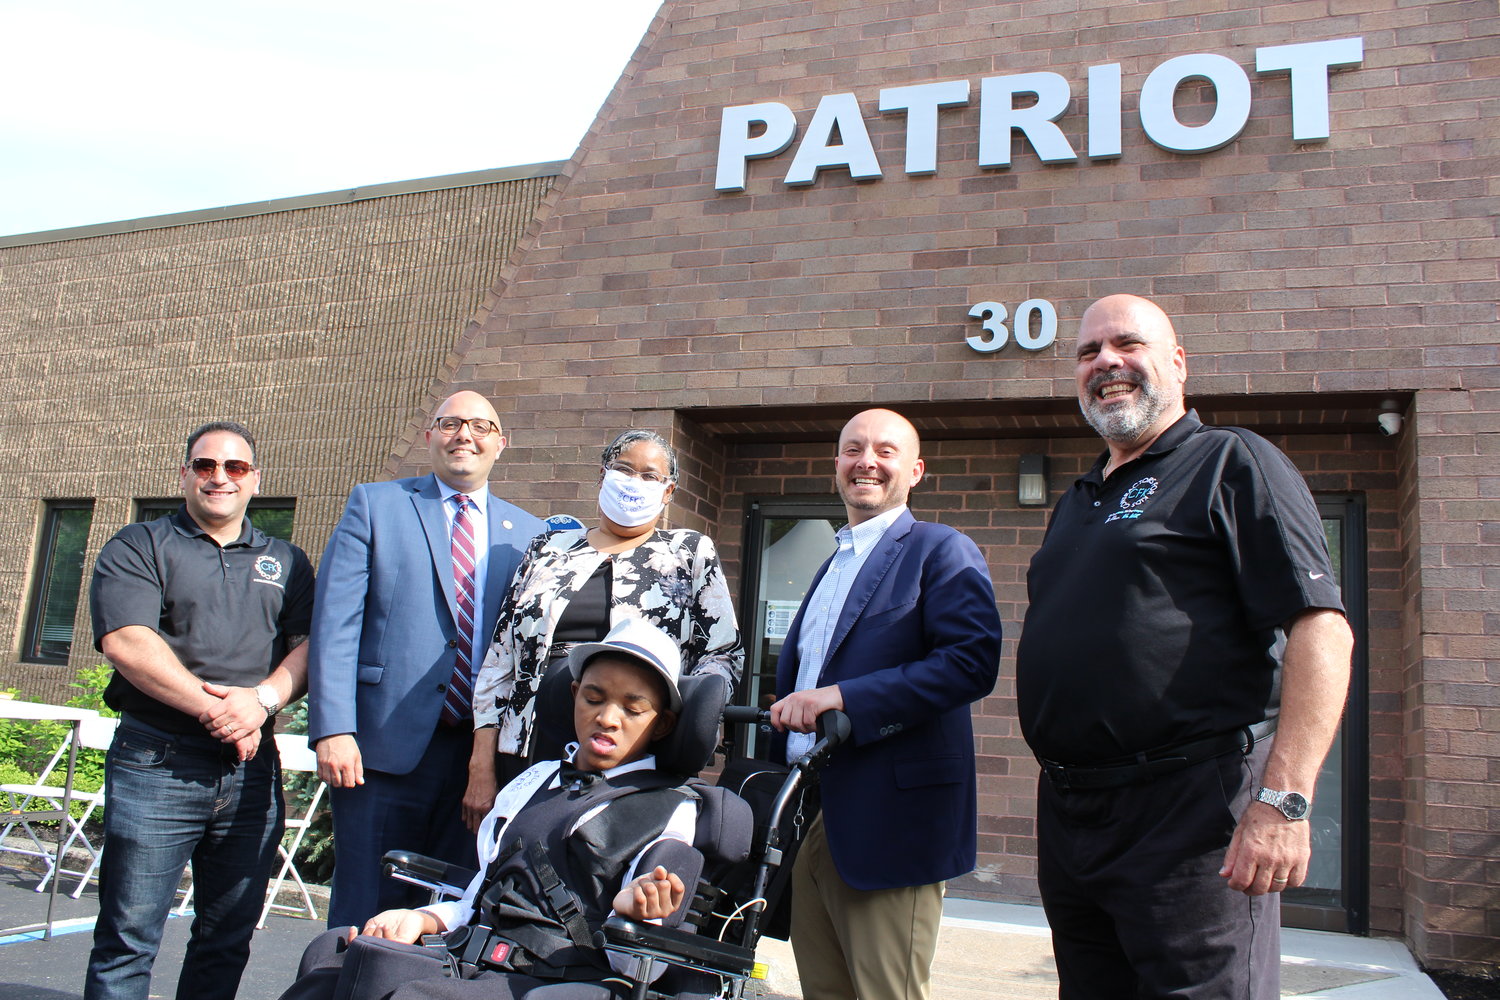 Contractors for Kids held their first Kevin Harney Courage Award. Left to right: Board president Steven DeLuca; award recipient Valerie Jackson with son Brian; board members Eric Seigneuray and Patricia Snedecor. Snedecor, from Patchogue, received a Courage Award.